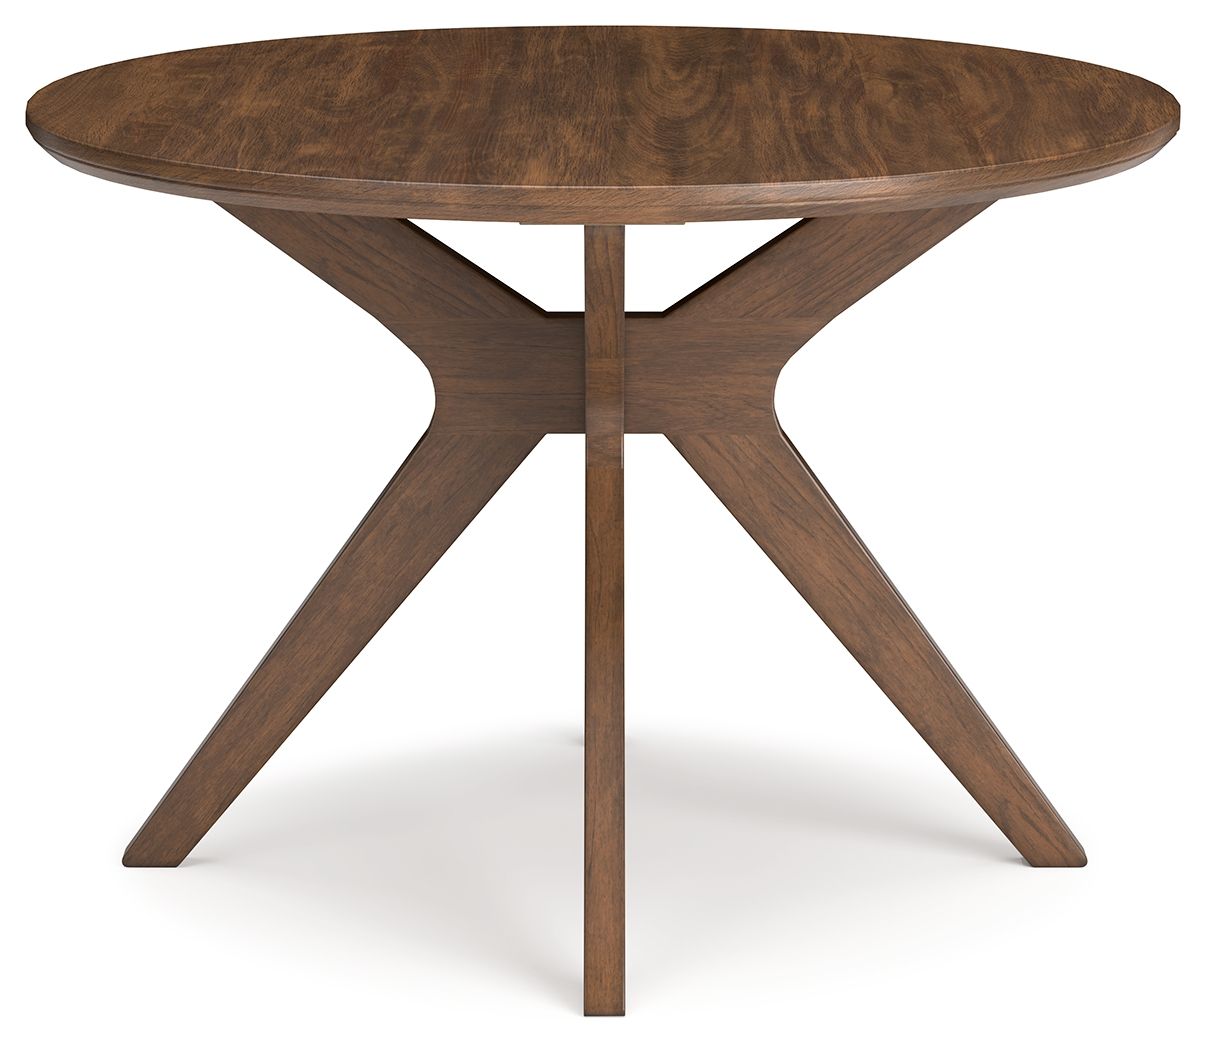 Lyncott - Brown - Round Dining Room Table - Tony's Home Furnishings